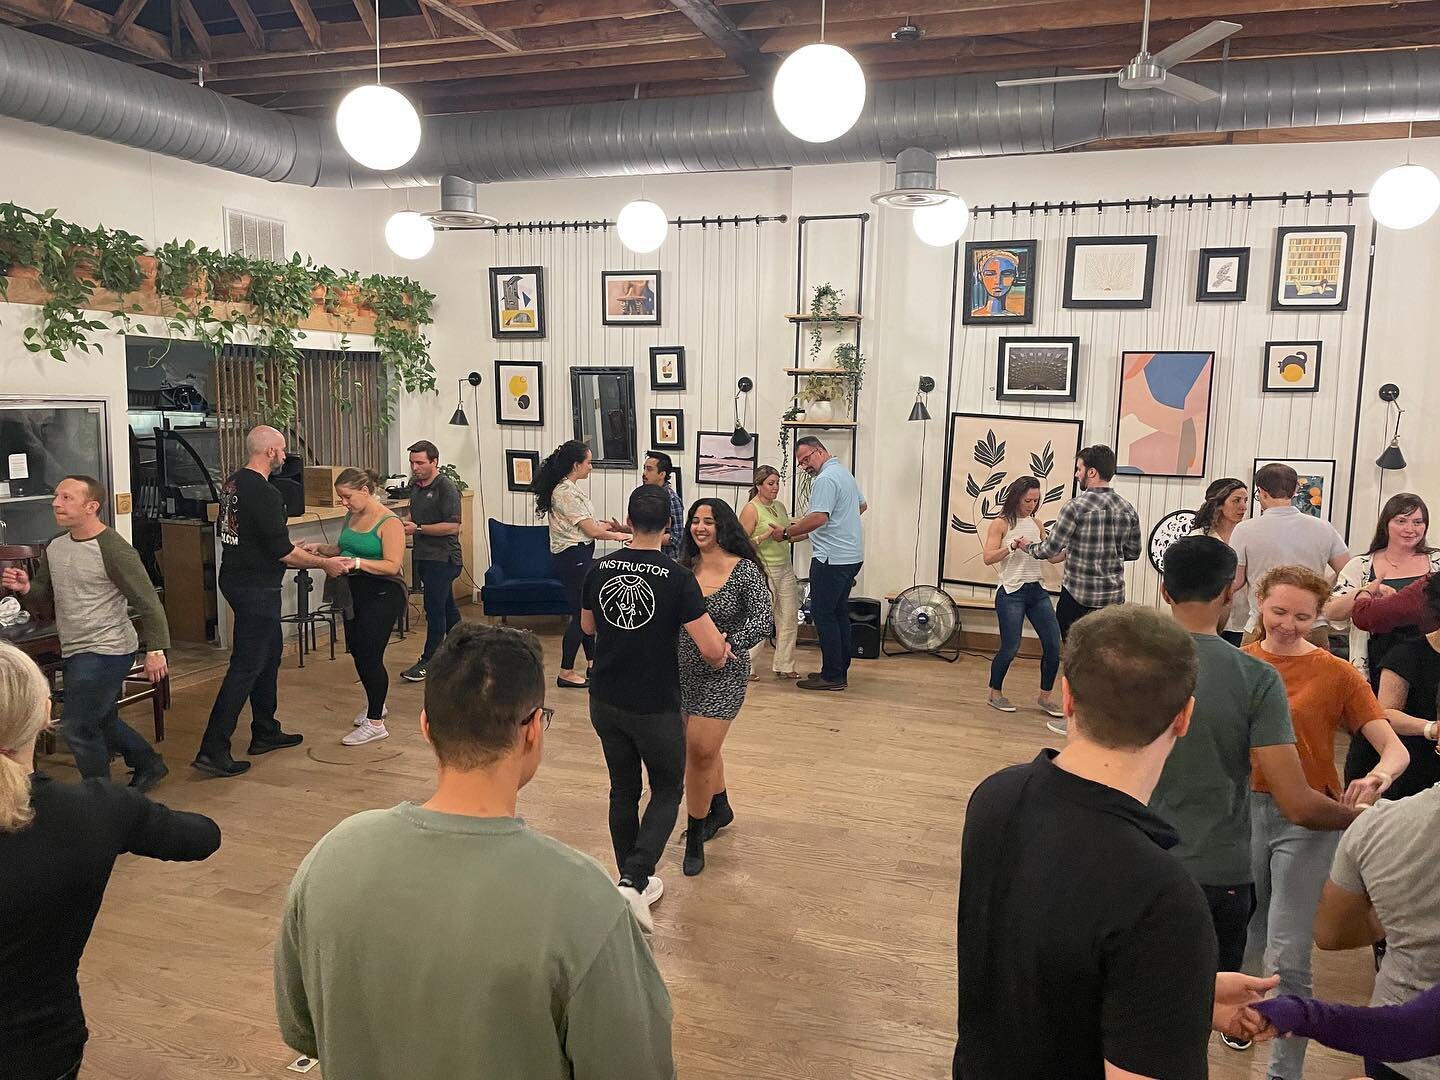 Salsa class just started with @judemzel and @josiewhoasie from @ferocitydance 🔥! Each Thursday at 8pm we have Dance Night at @three.whistles &mdash; and today is Latin Night! We hope to see you tonight for social dancing 💃🏼🕺! #salsa #salsaclass #